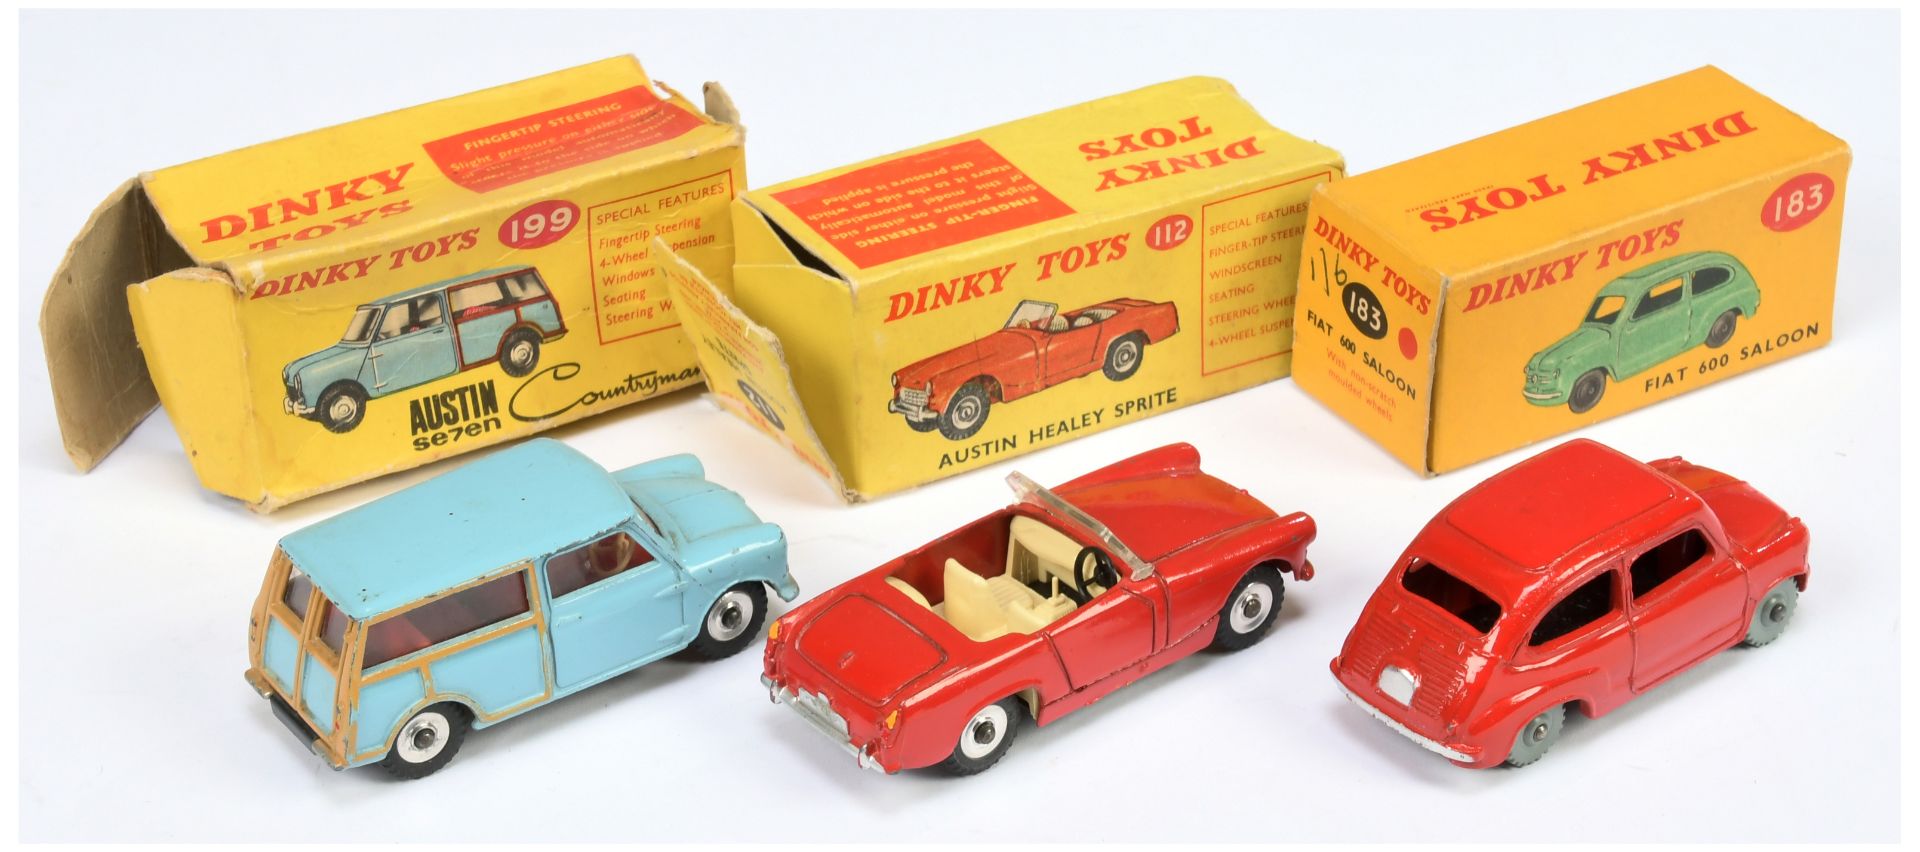 Dinky Toys Group To Include (1) 112 Austin Healey Sprite - Red, (2) 183 Fiat 600 Saloon - Red and... - Bild 2 aus 2